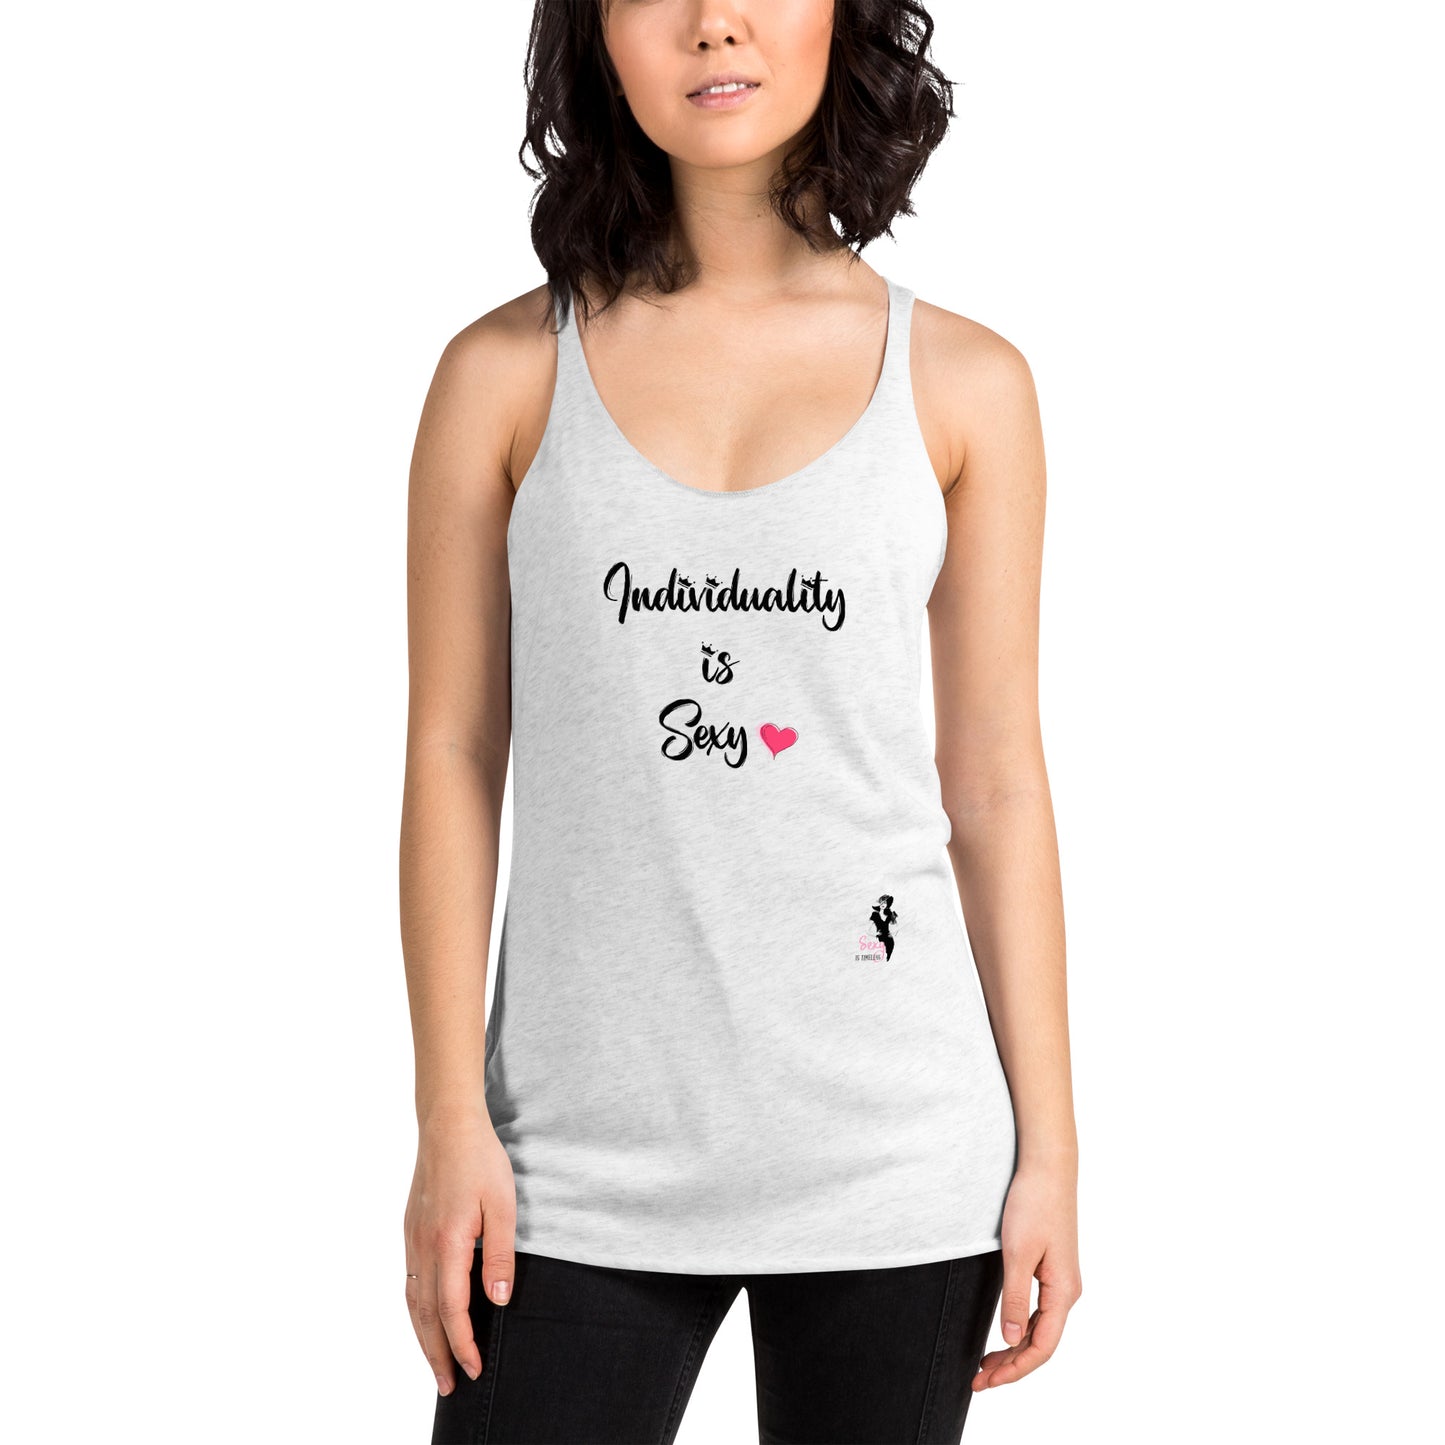 Women's Racerback Tank - Individuality is Sexy